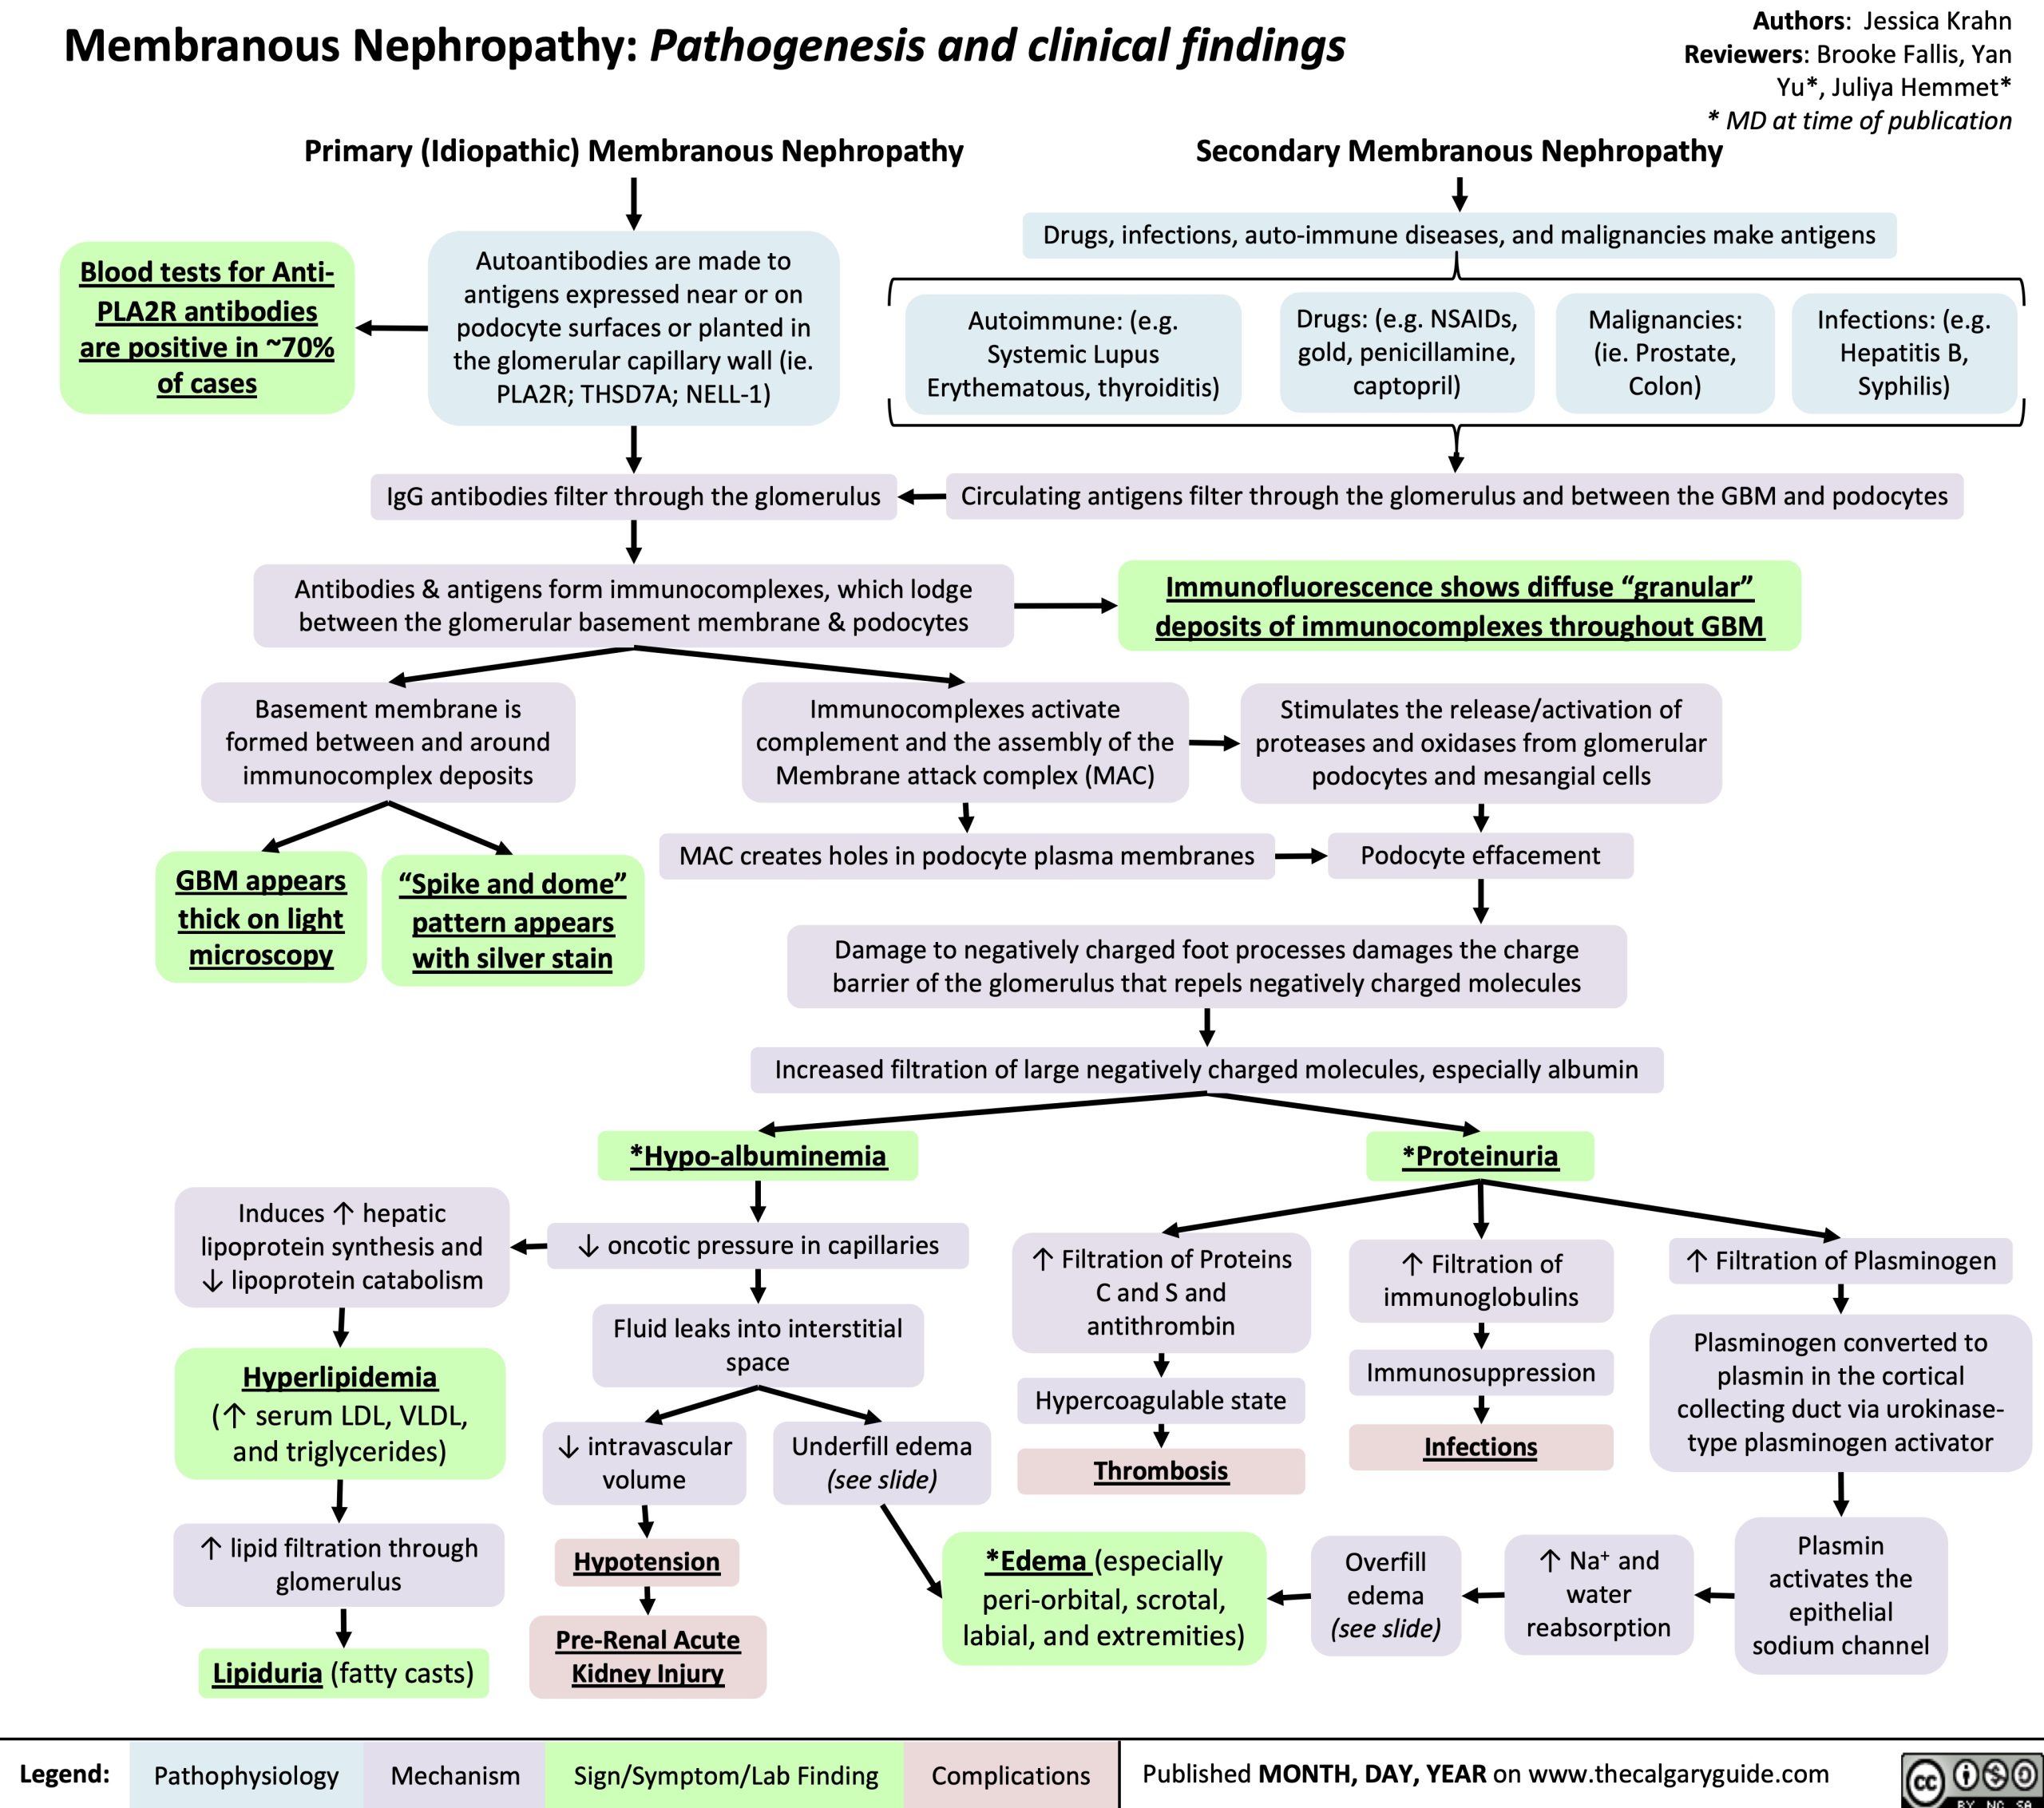 Membranous Nephropathy: Pathogenesis and clinical findings